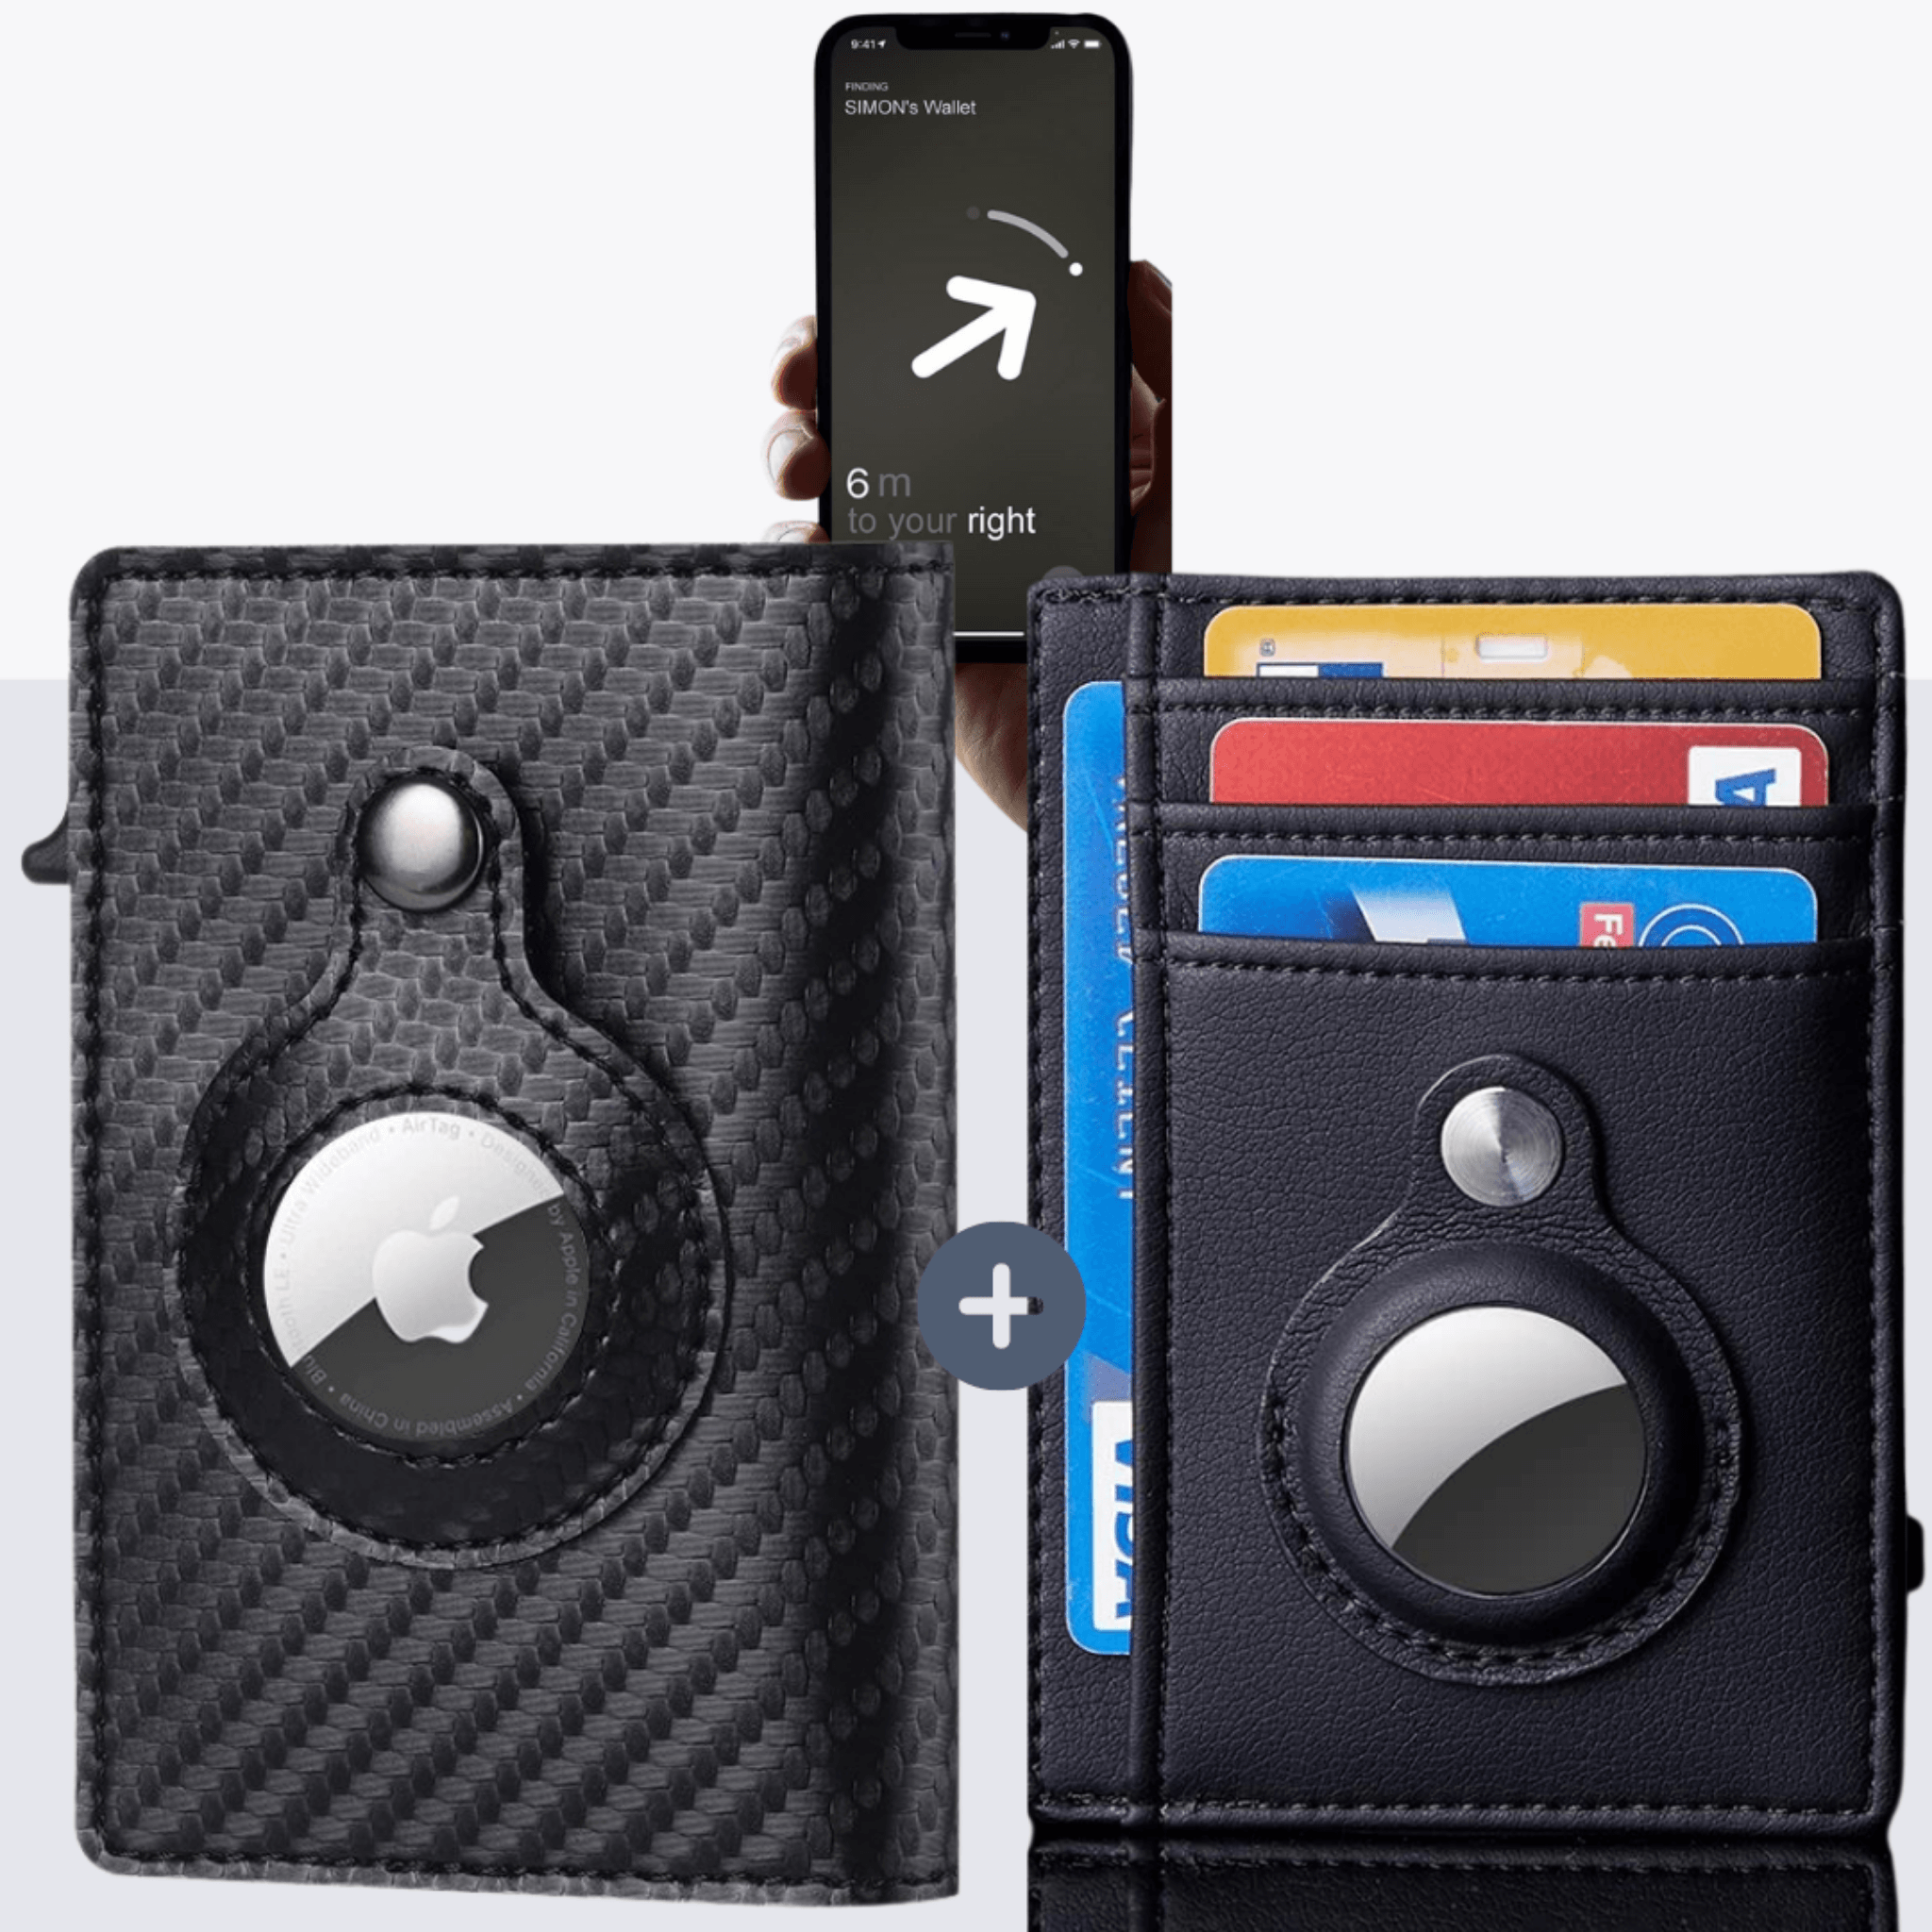 Abby's™ Anti-Lost Slim Leather AirTag Trackable Wallet with Apple AirTag Holder Case - RFID Blocking and Protection - Abbycart